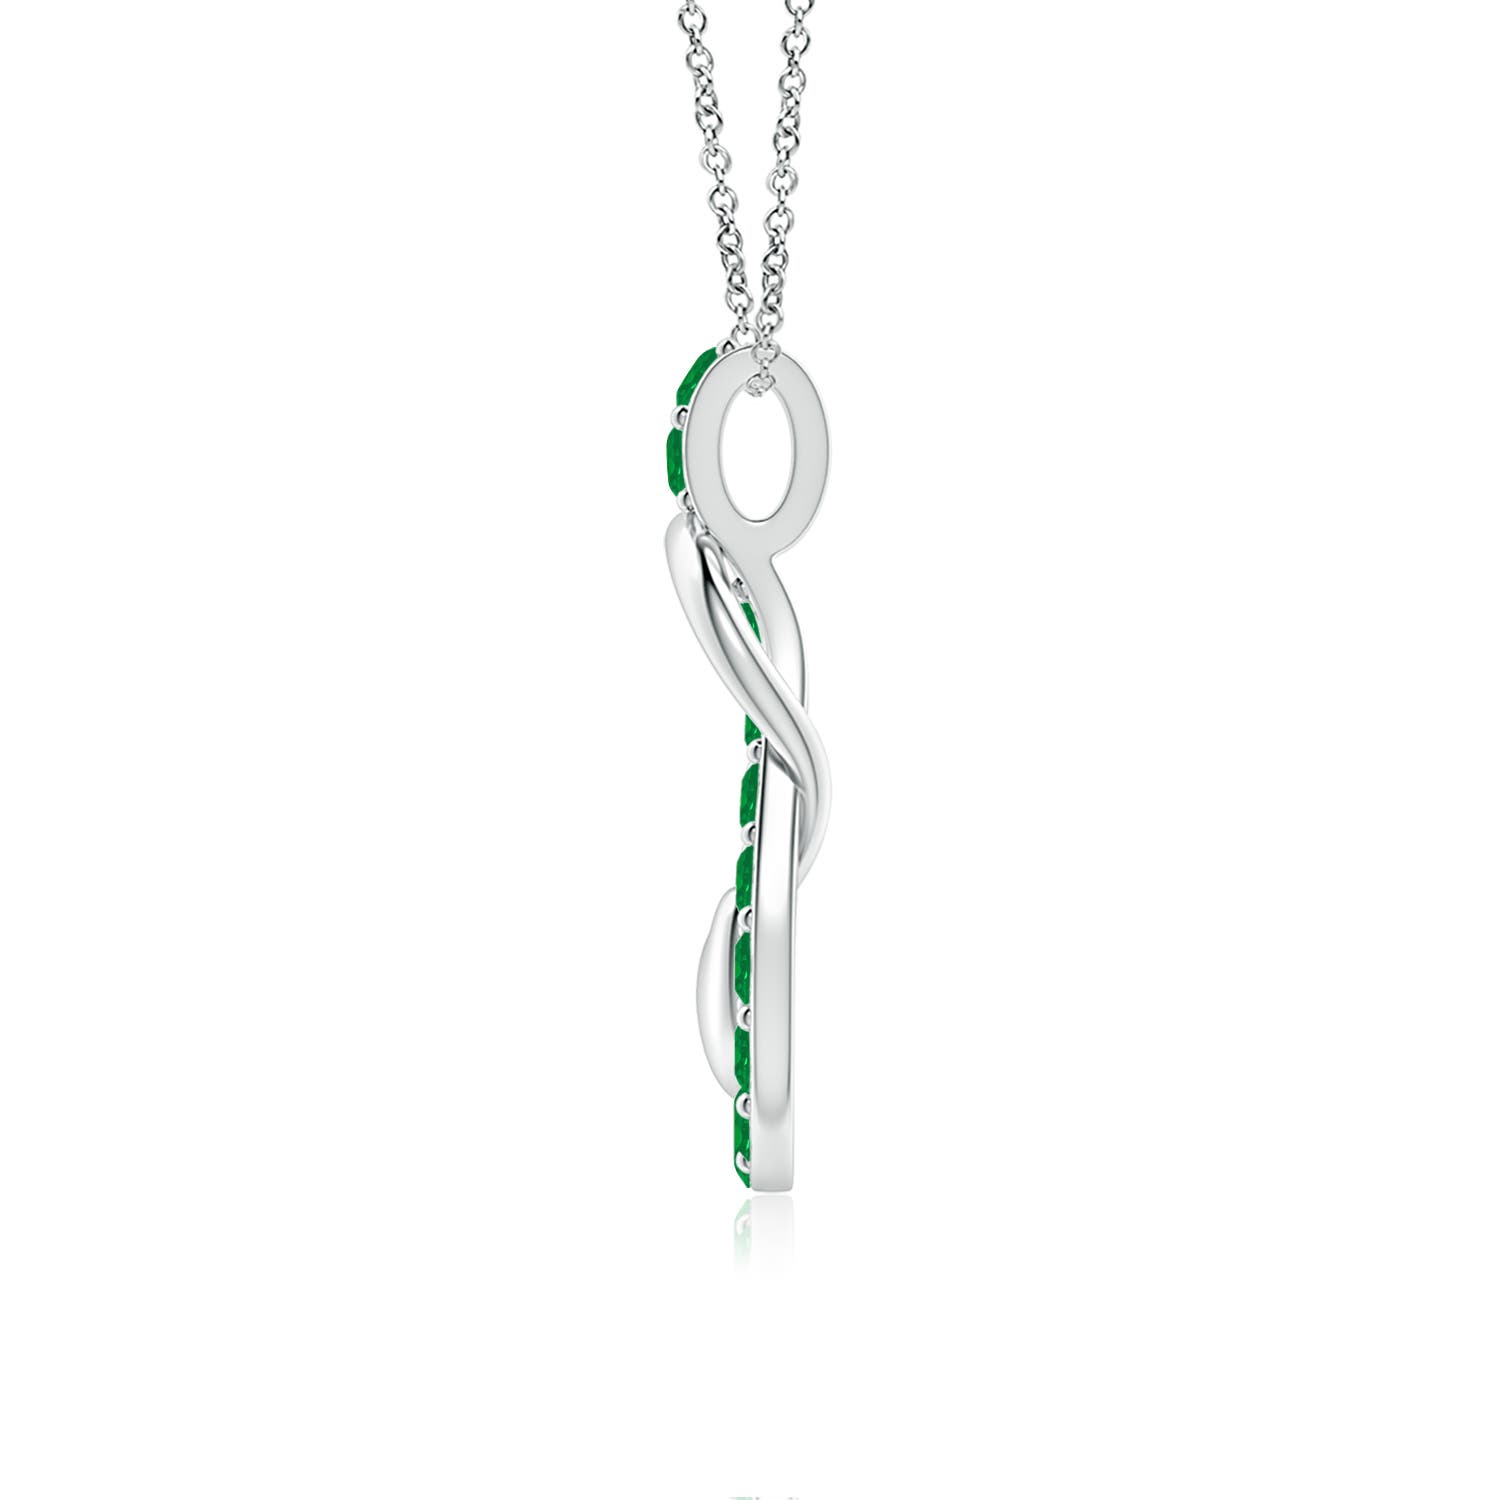 AA - Emerald / 1.2 CT / 18 KT White Gold